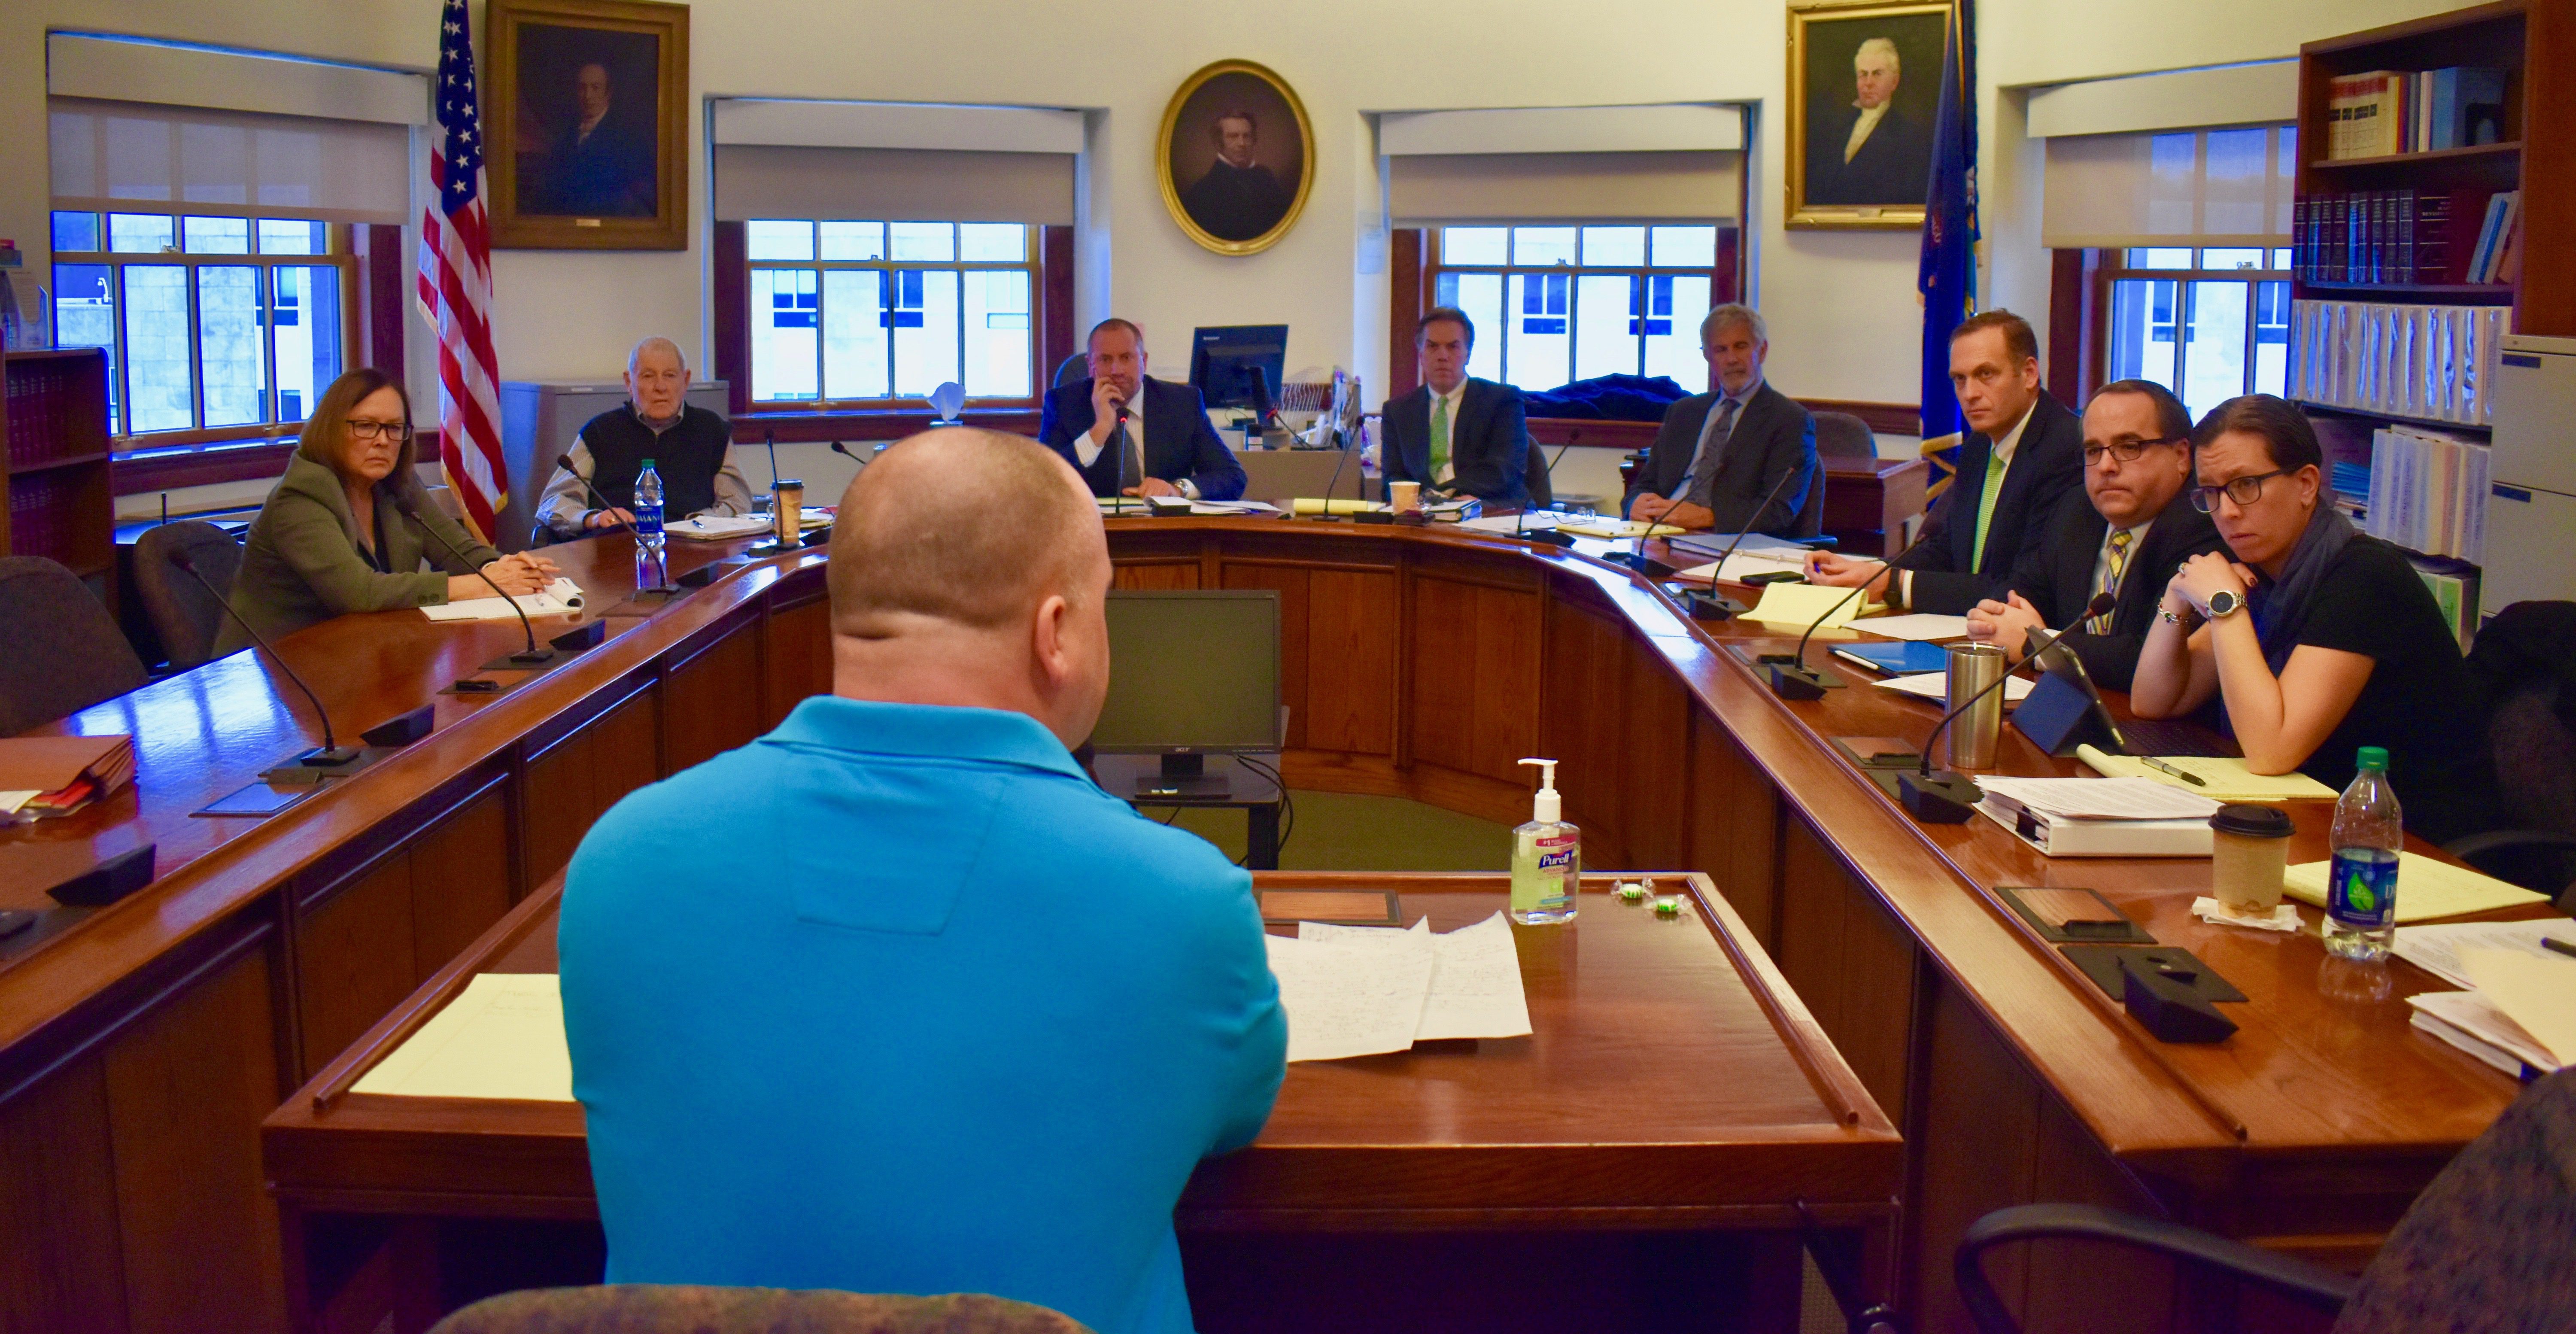 In the crosshairs: Advocates voice concerns about Maine Commission on Indigent Legal Services